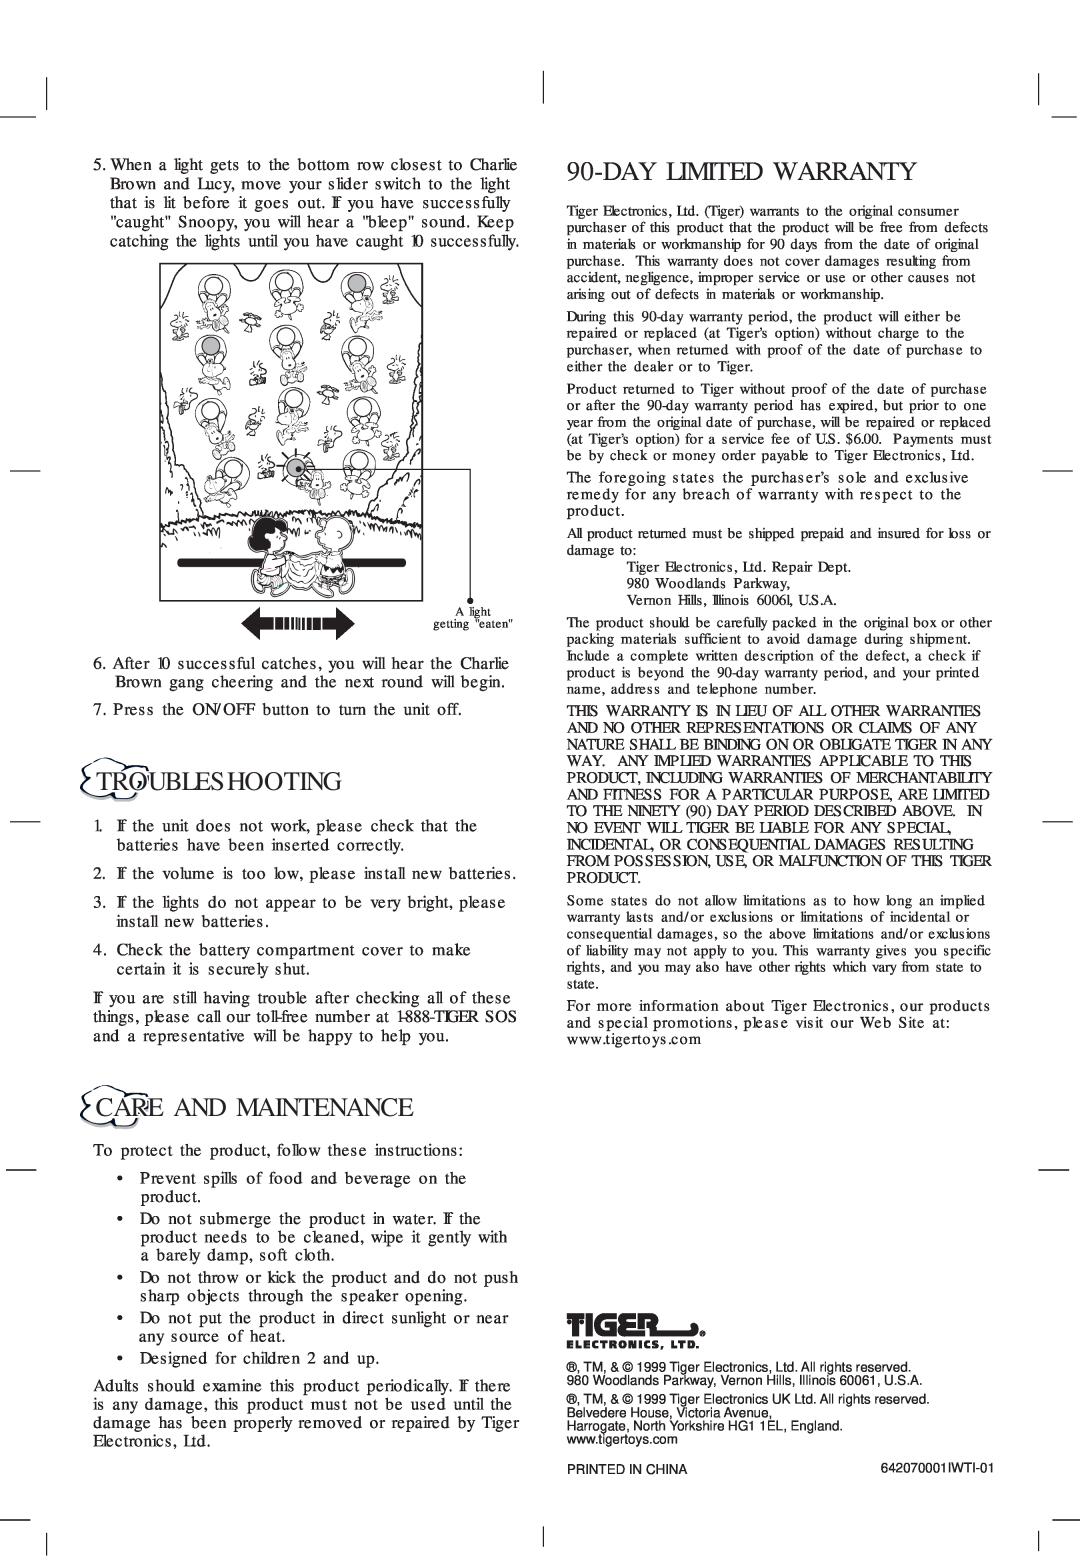 Hasbro 64-207 instruction manual Troubleshooting, Day Limited Warranty, Care And Maintenance 